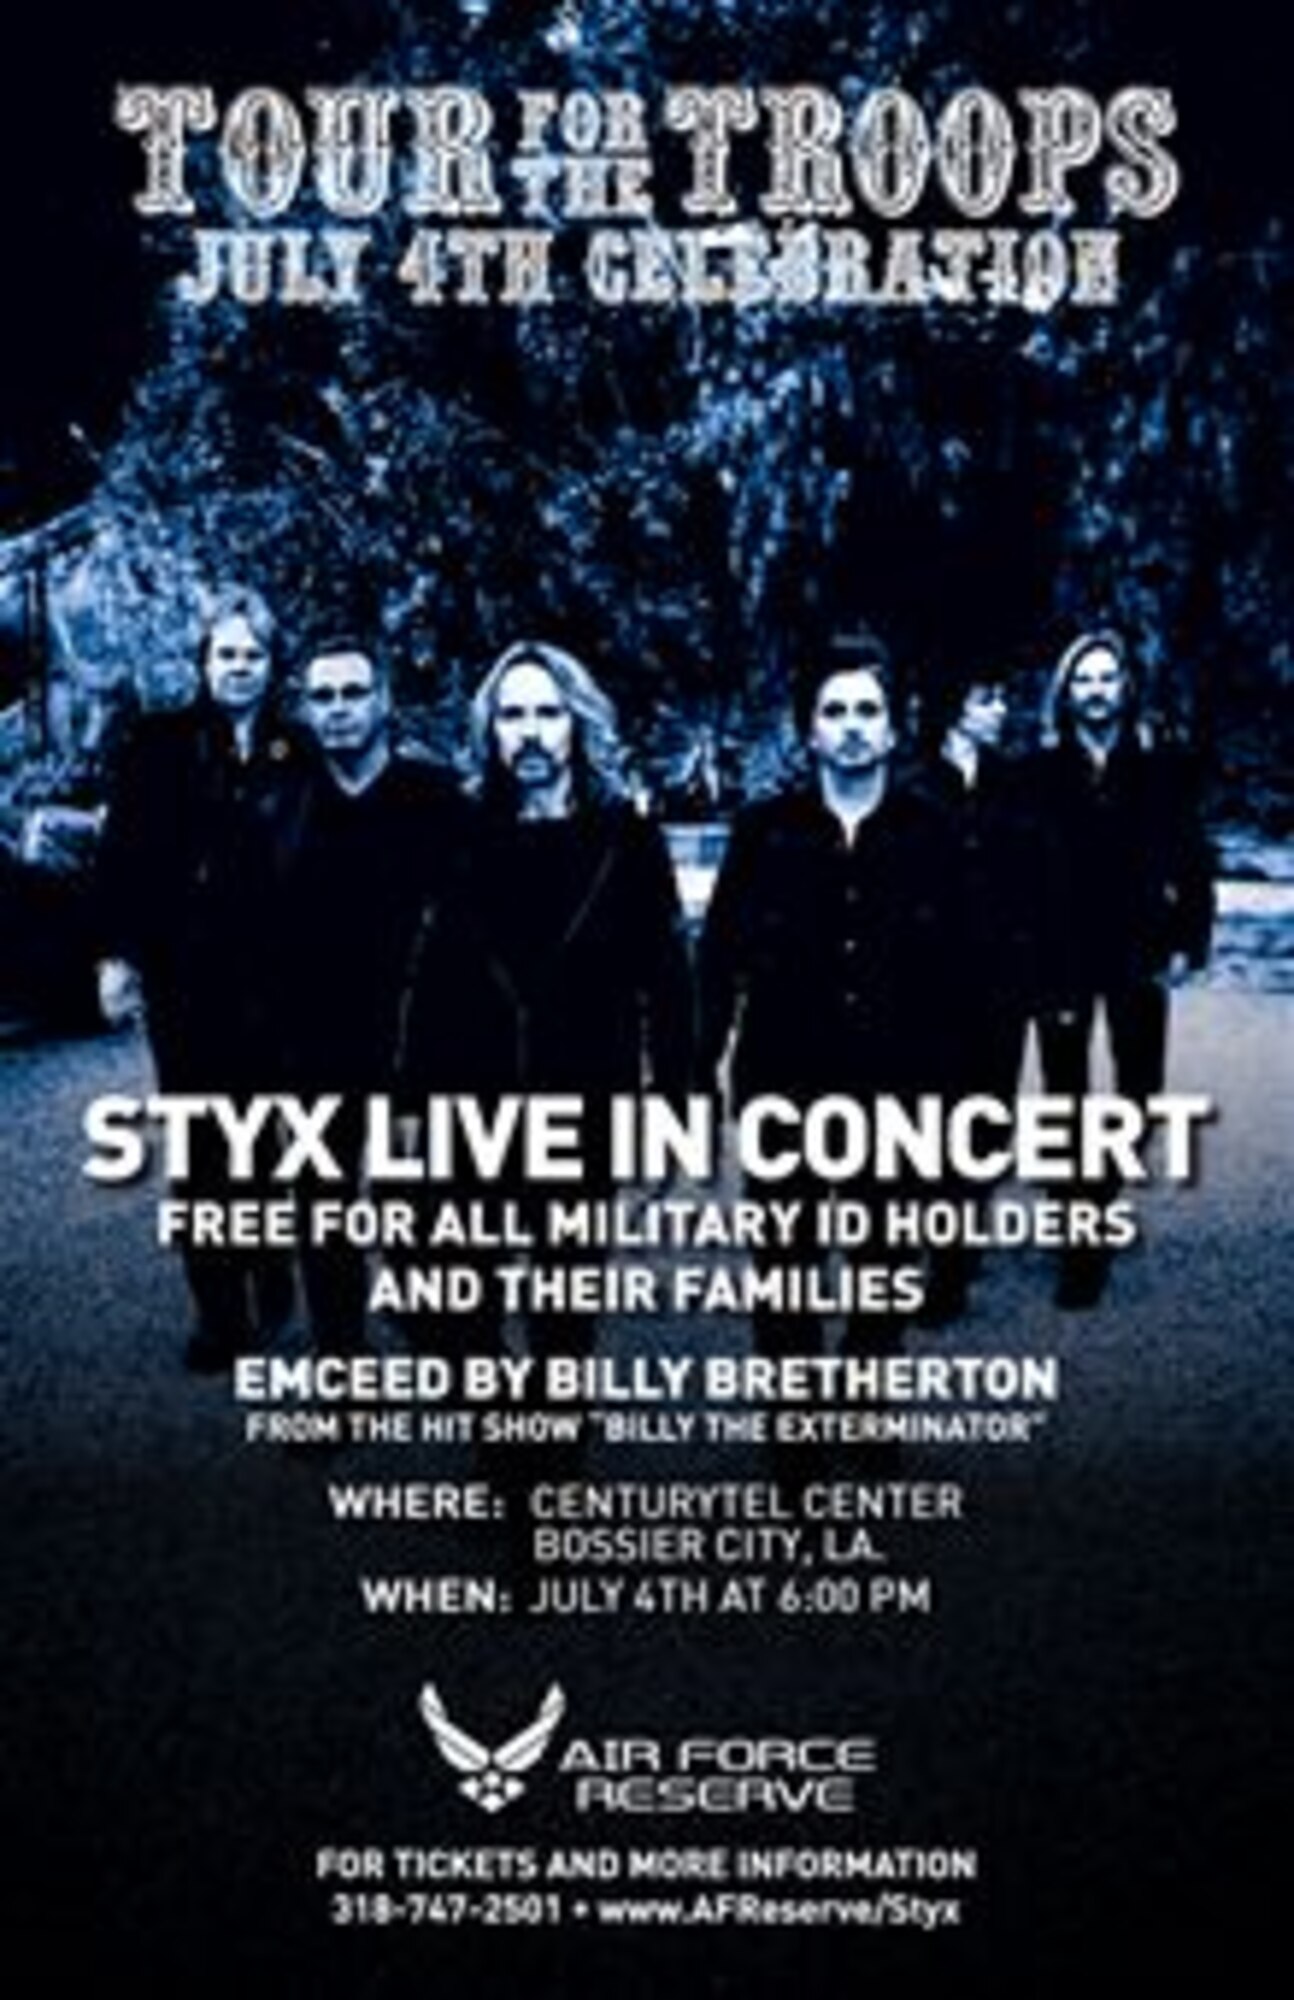 Styx live in concert.  Free for all military ID holders and their families.